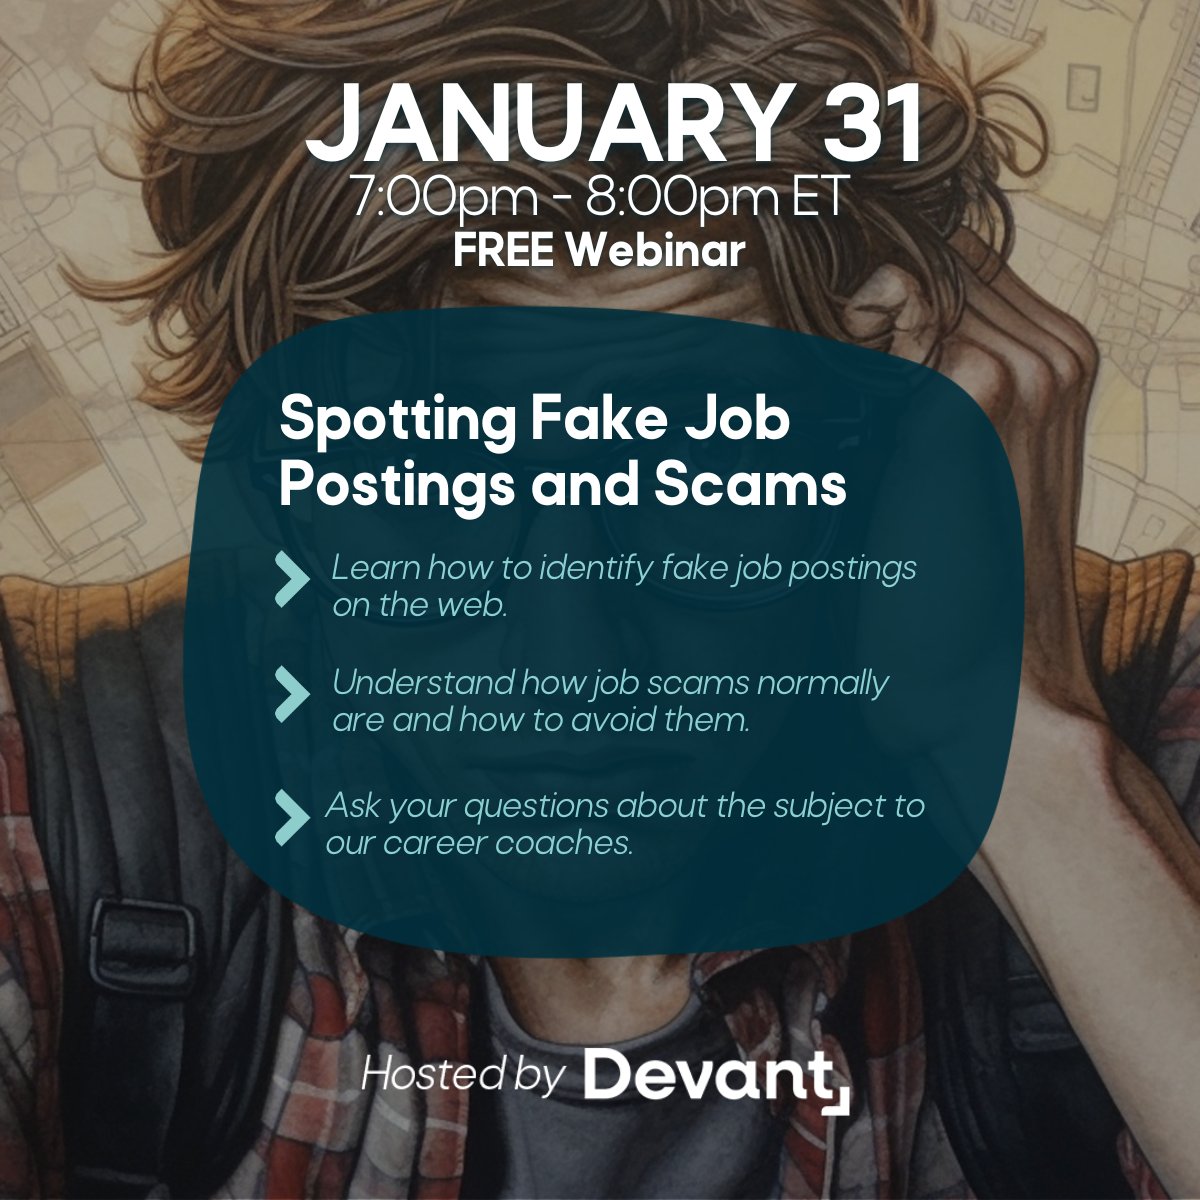 Are you an international student with career questions? Check out @DevantGroup's events on topics like careers in AI, new immigration policies and job scams! Create an account and register today: devant.careercentre.me/welcome/Devant… #CentennialCollege #CareerDevelopment